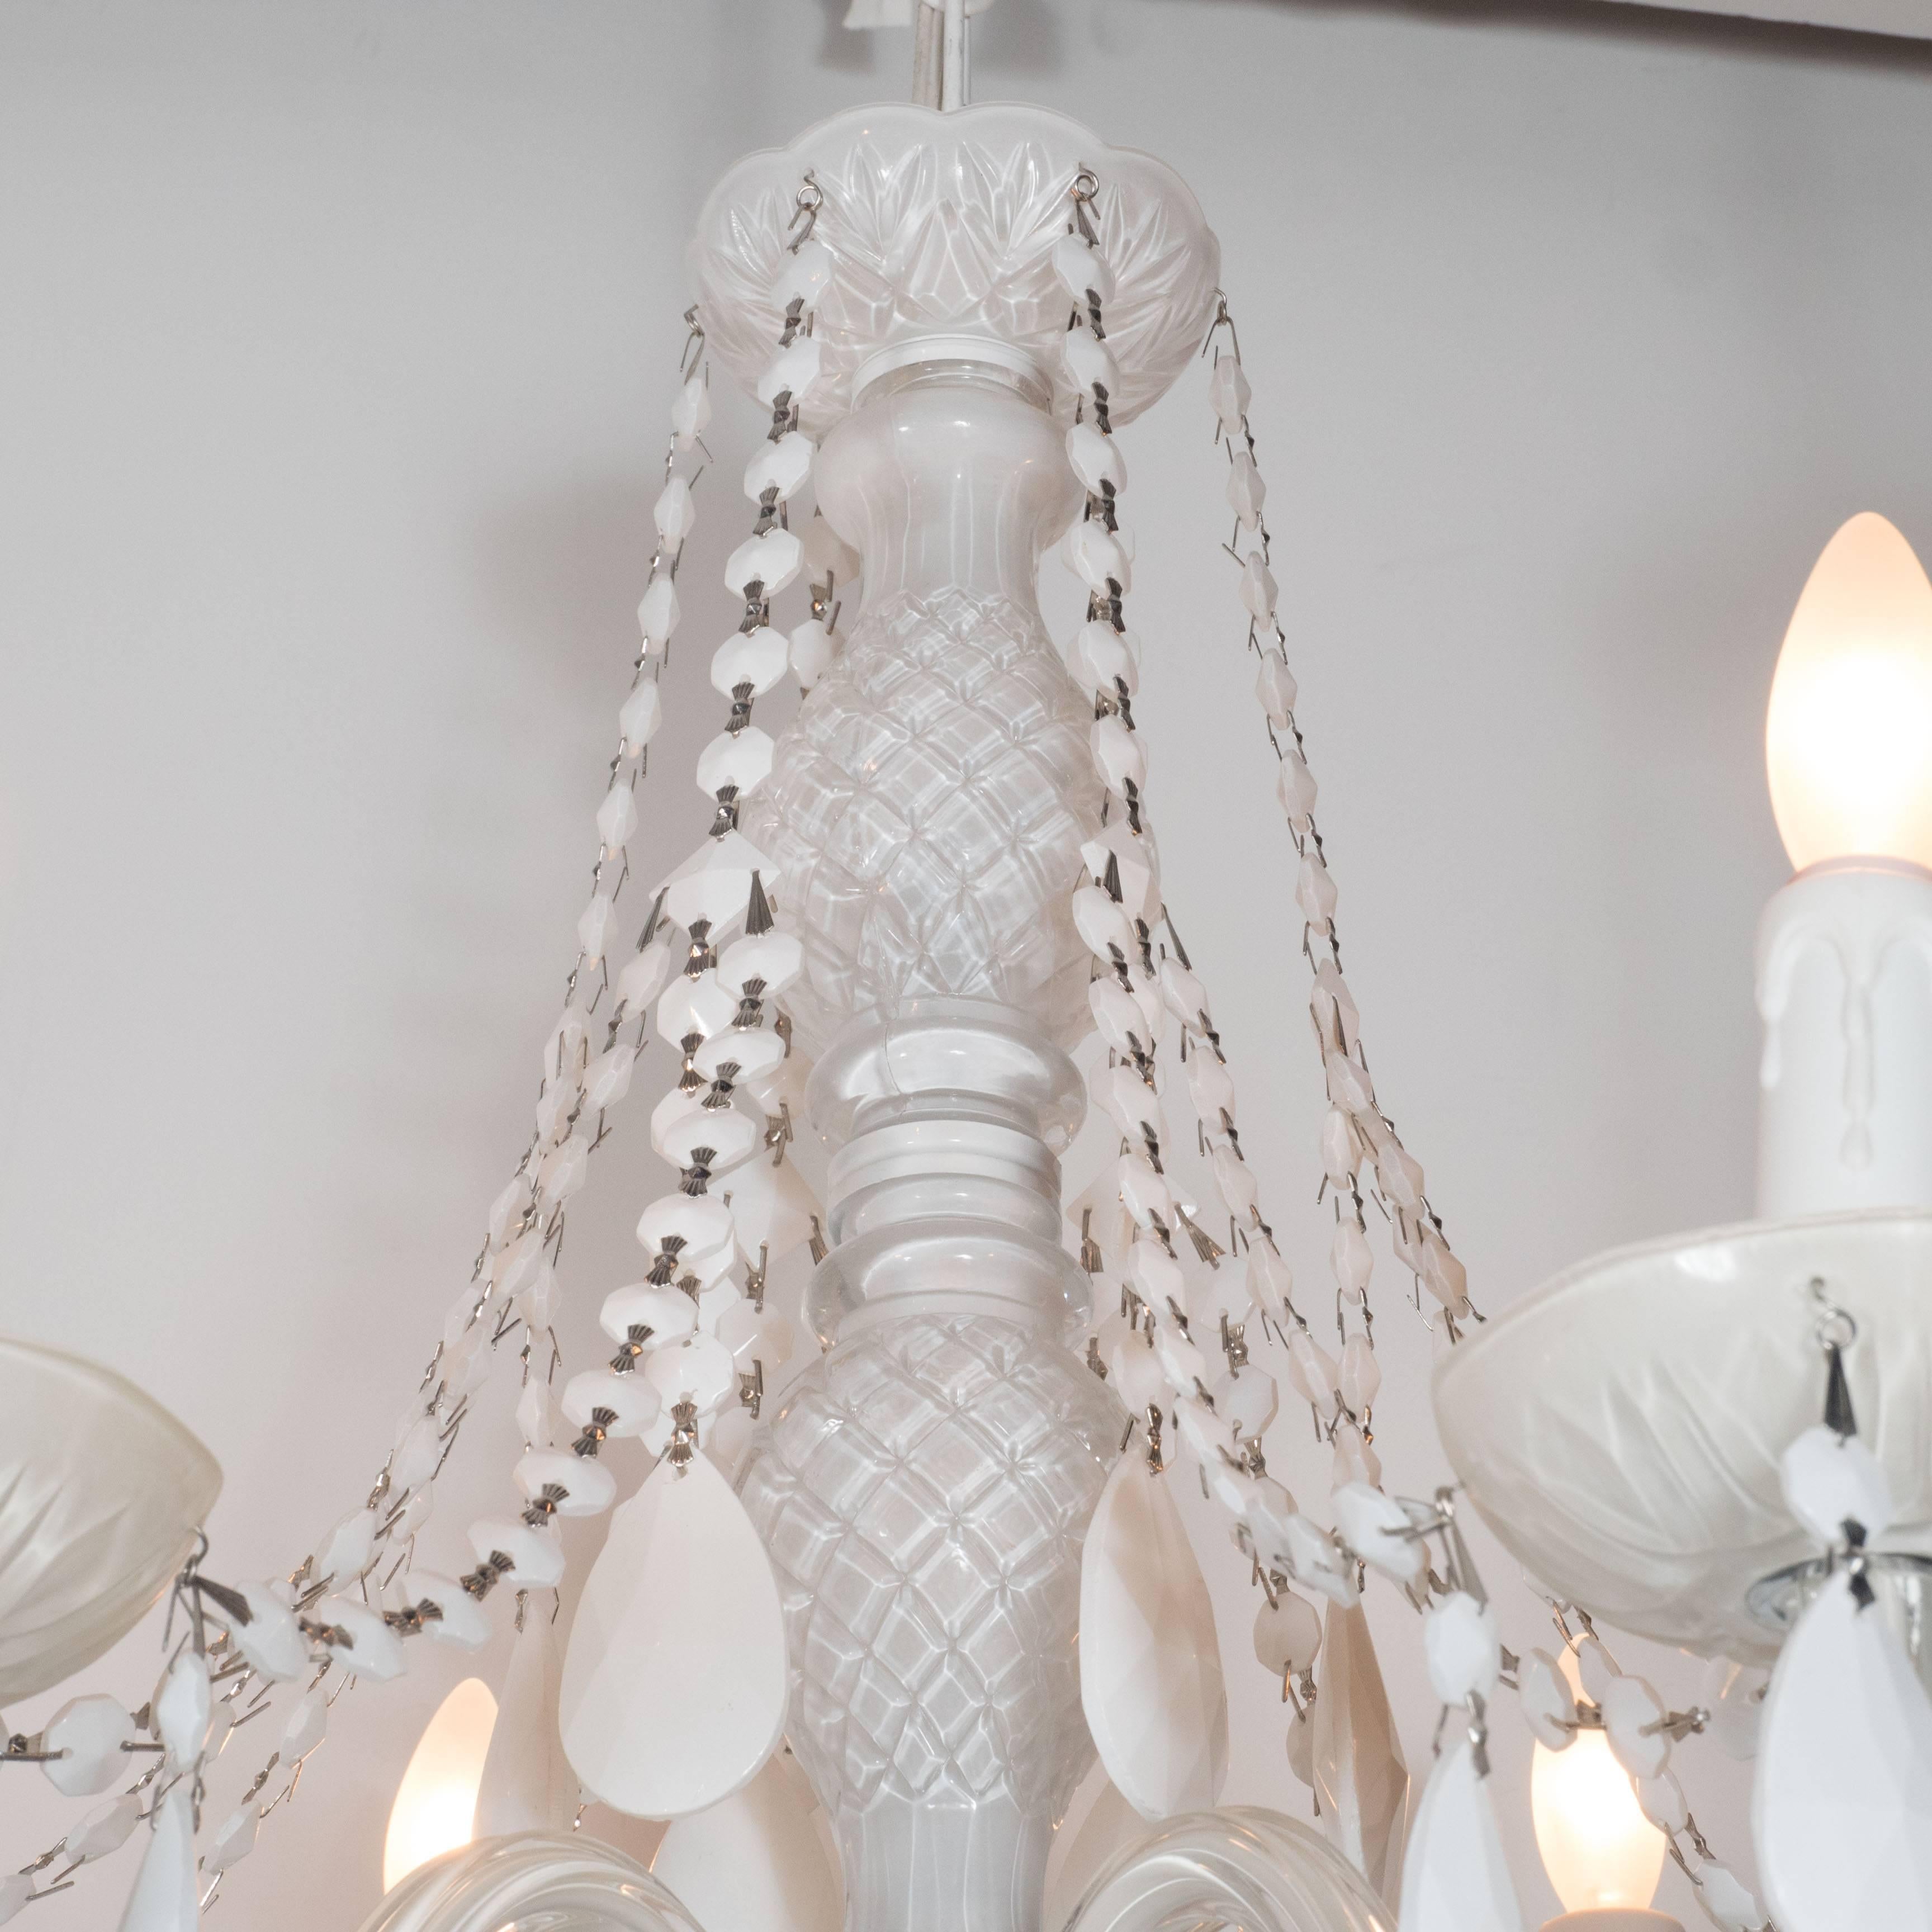 American Glamorous Hollywood Regency Chandelier in White Pigment Glass and Jewel Pendants For Sale